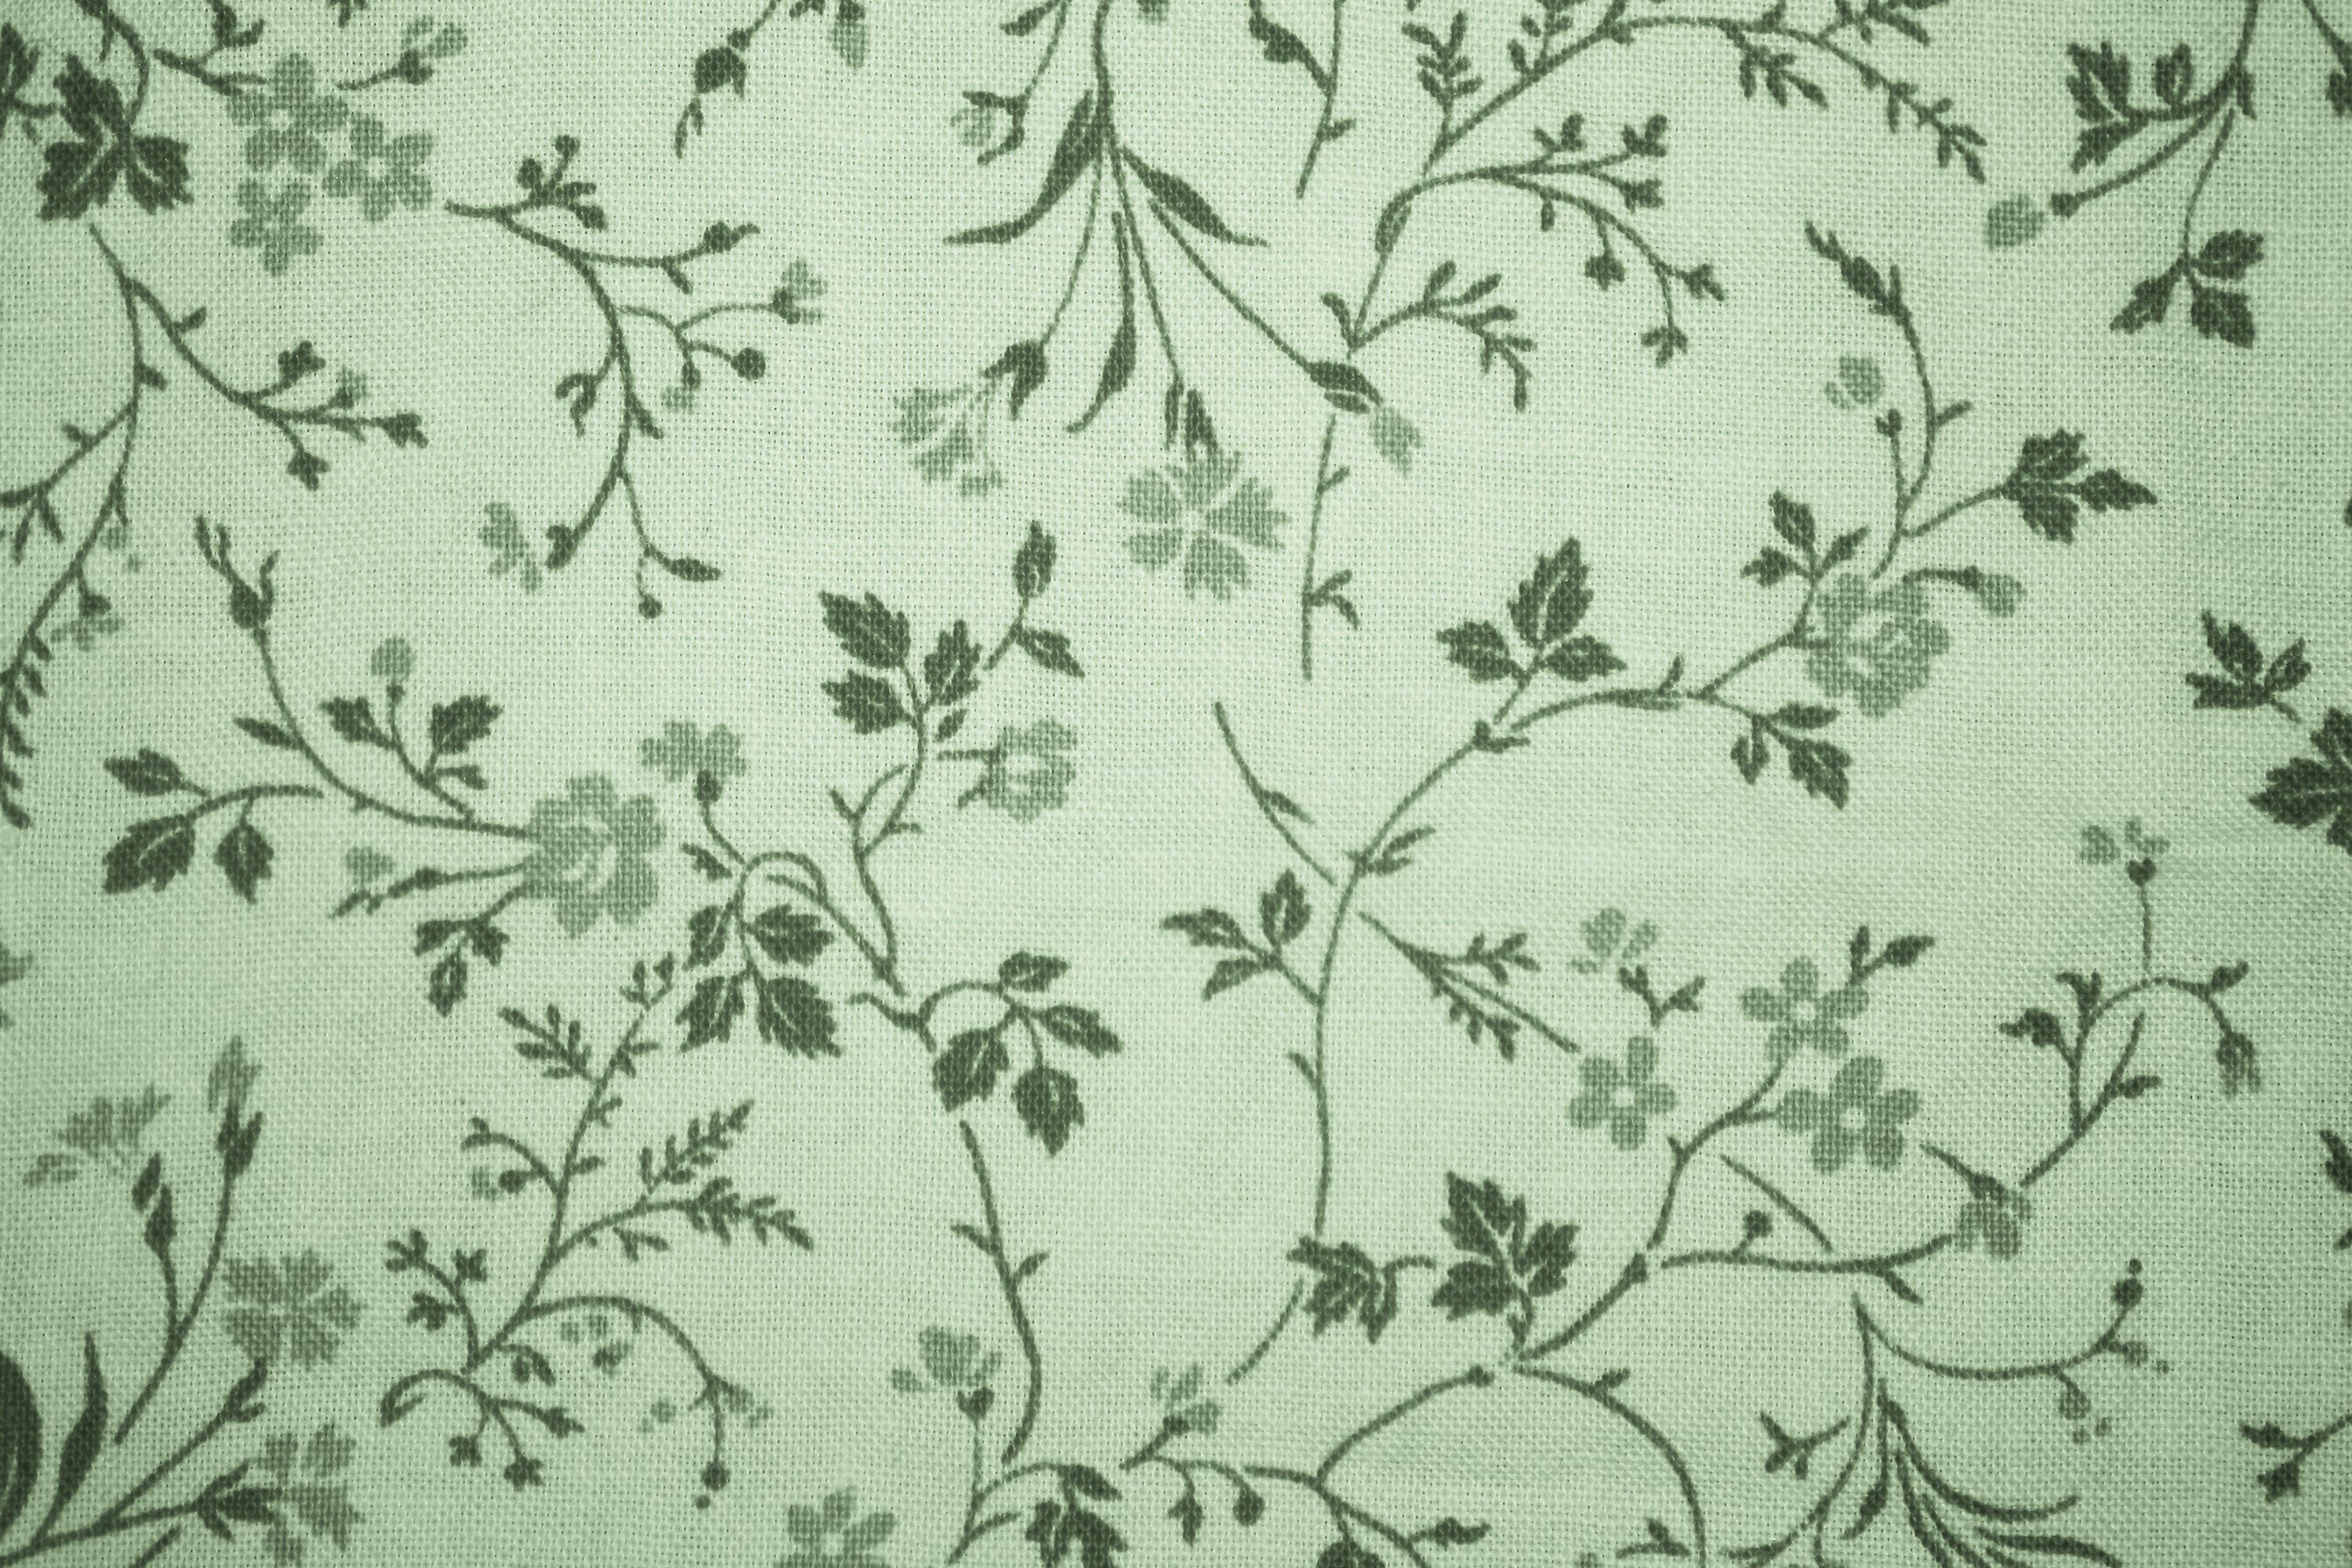 A close up of a green floral fabric - Sage green